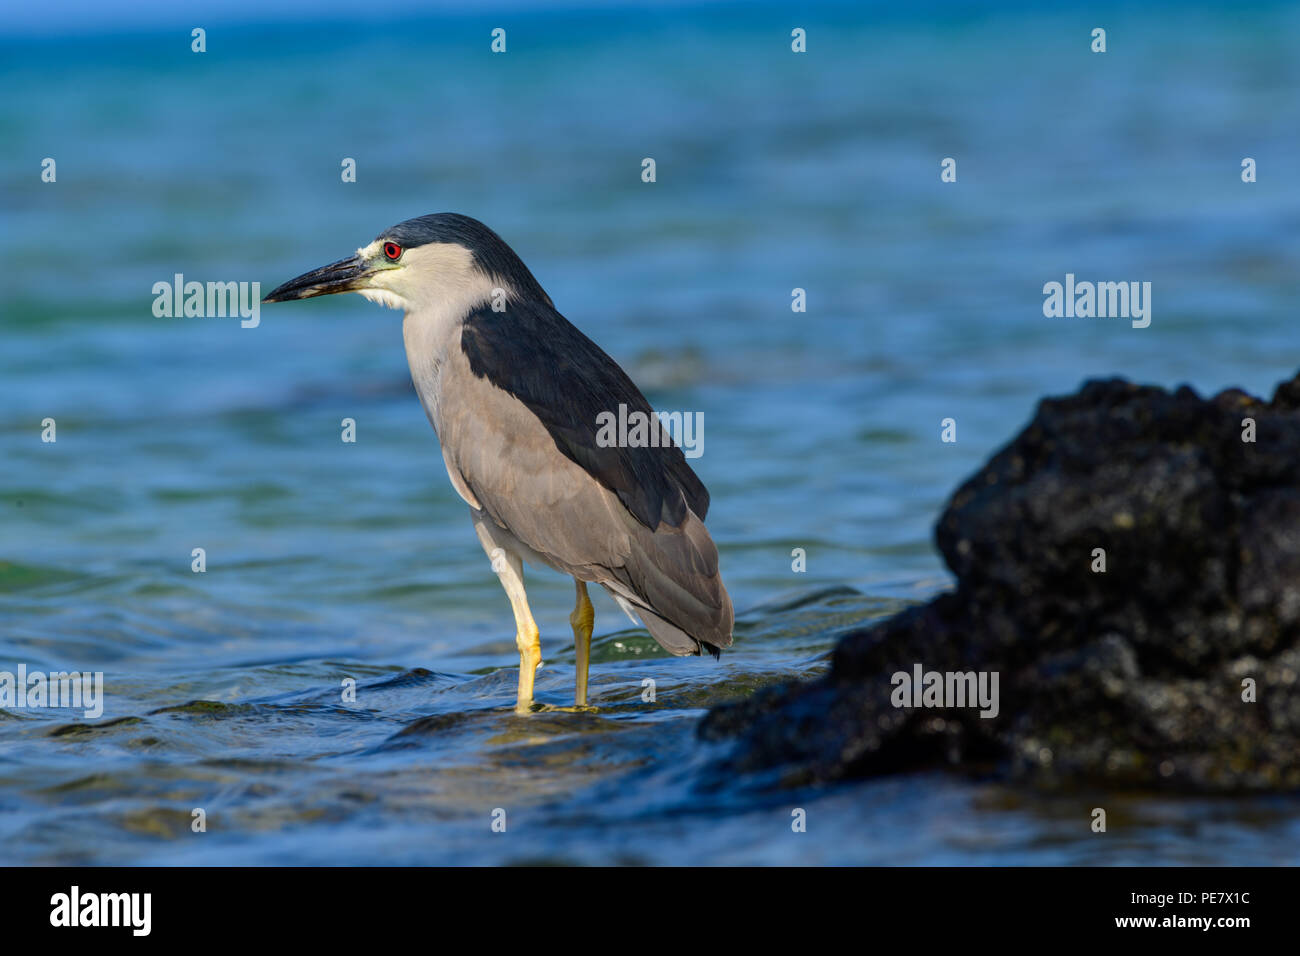 hawaiian Black Crowned Night Heron (Nycticorax nycticoras) or Auku'u perched on a lava rock in the Pacific ocean off the coast of Hawaii Stock Photo